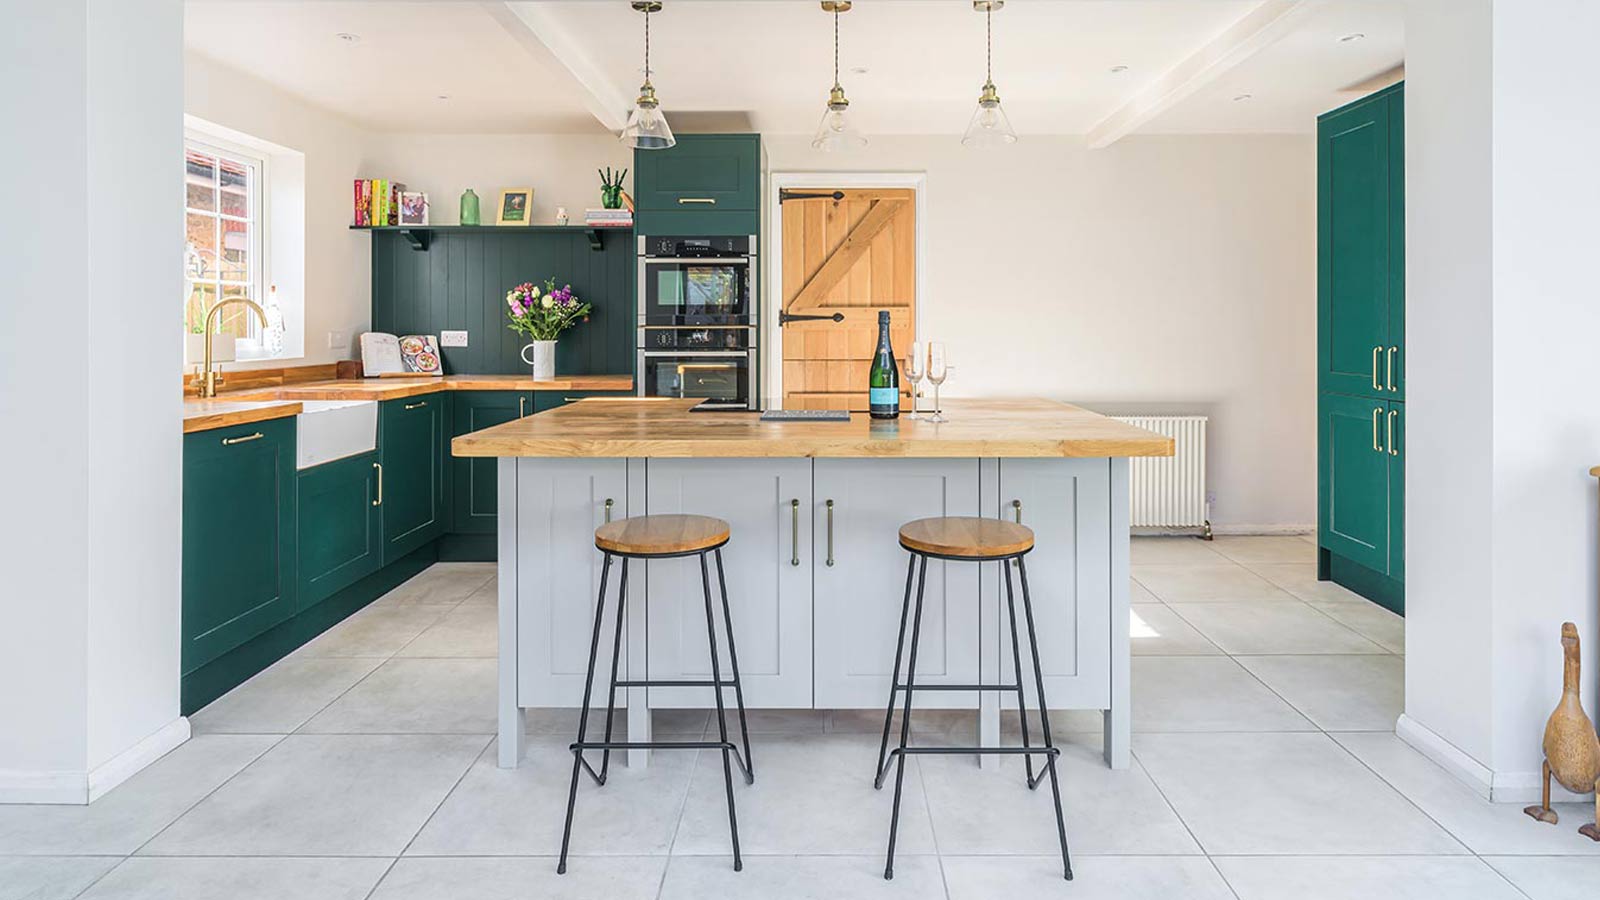 A clean kitchen with grey and green doors, symbolising cleaning life hacks